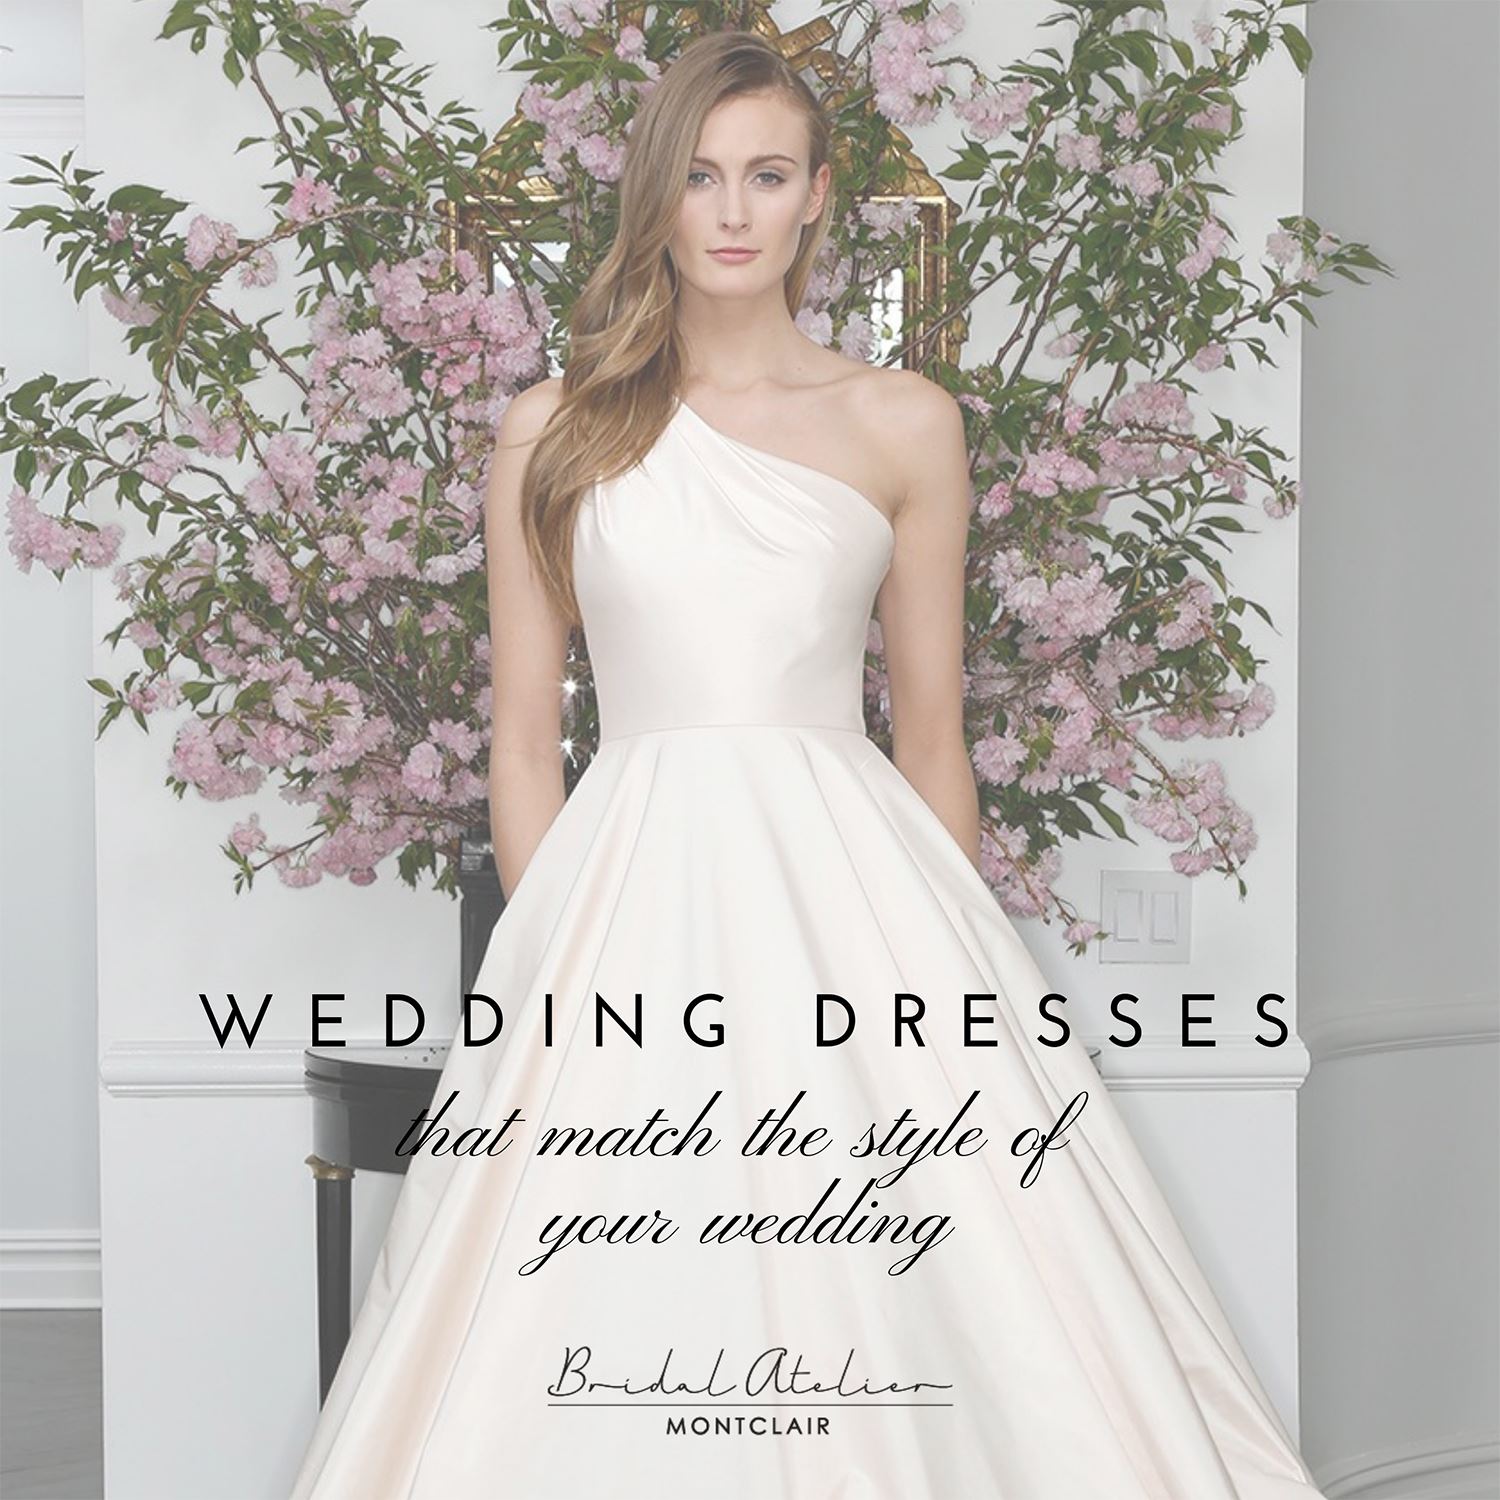 Wedding Dresses that Match the Style of Your Wedding. Desktop Image